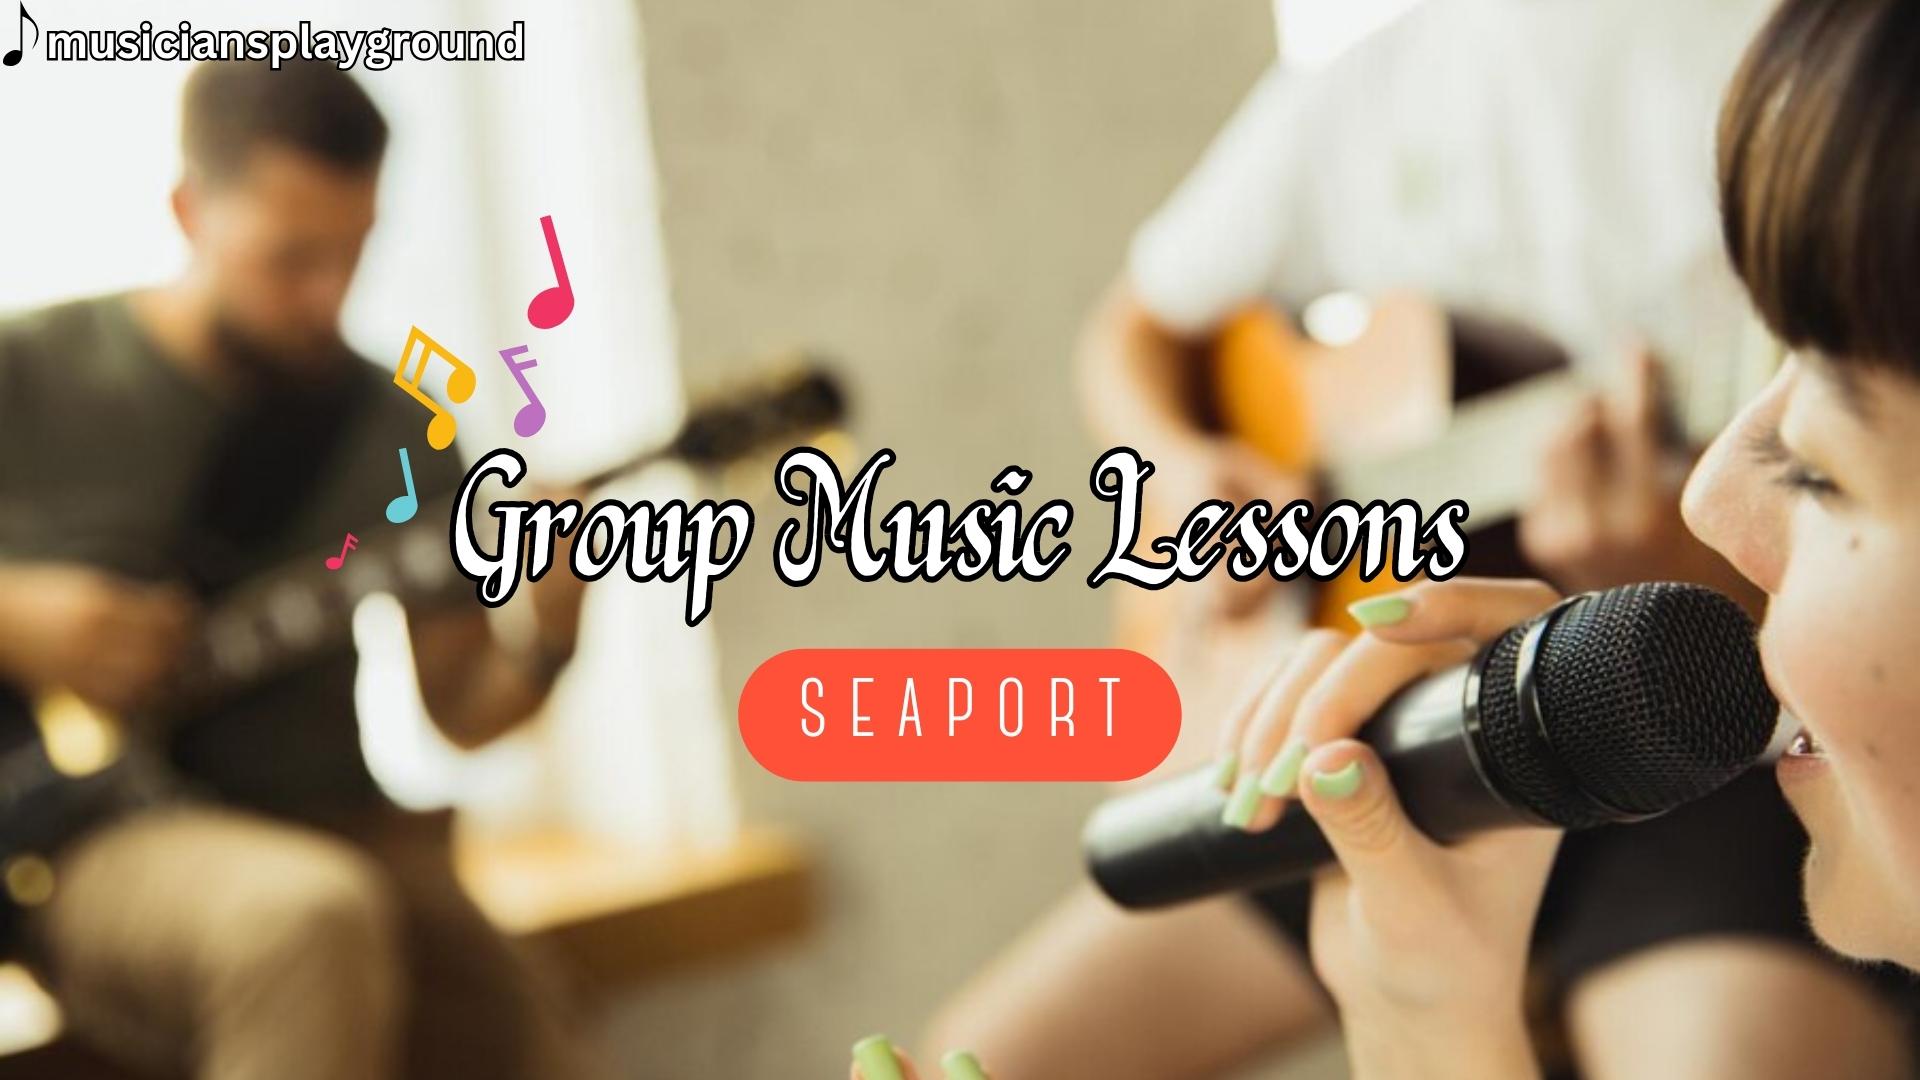 Group Music Lessons in Seaport, Massachusetts: Enhance Your Musical Skills at Musicians Playground